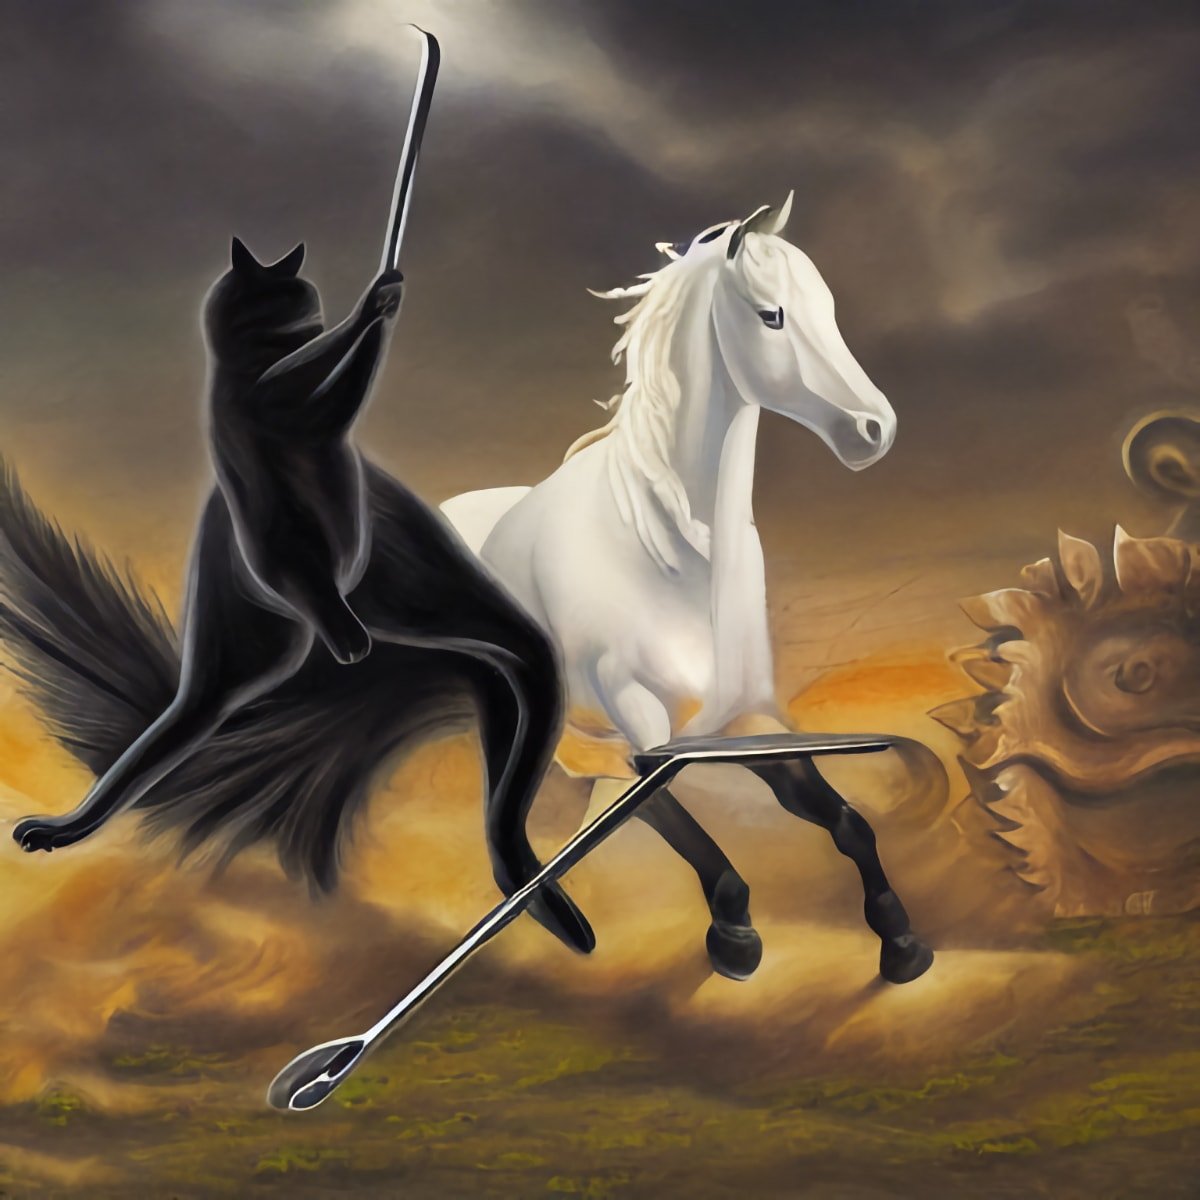 And I looked, and behold a pale horse: and he that sat on it was called Kitten of Death, and Hell followed him.